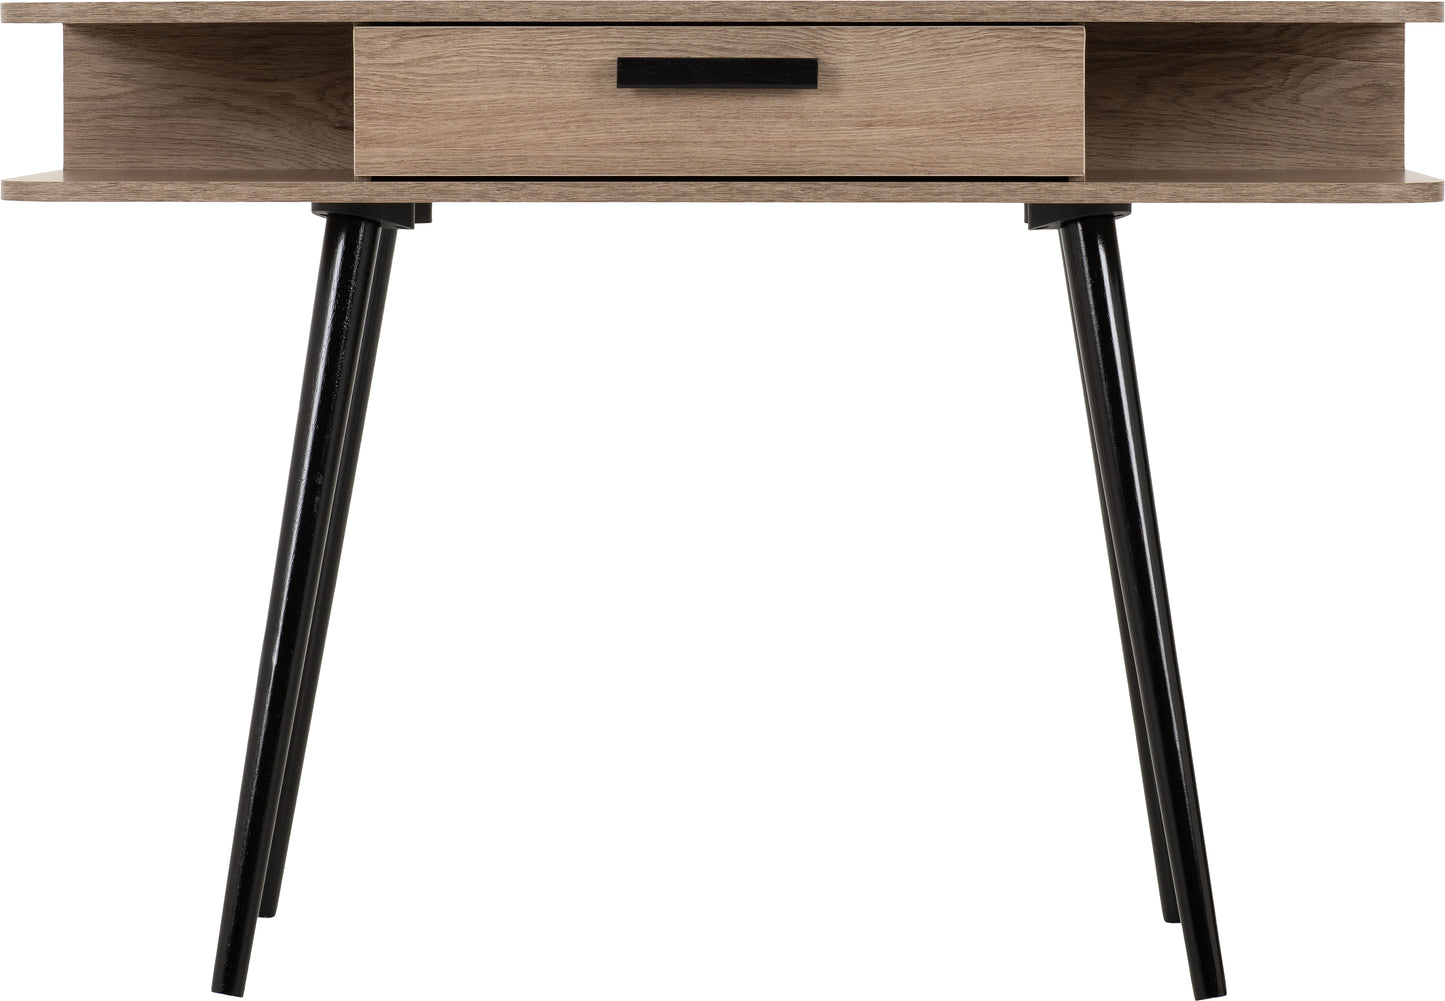 SAXTON 1 DRAWER CONSOLE TABLE  - MID OAK EFFECT/GREY